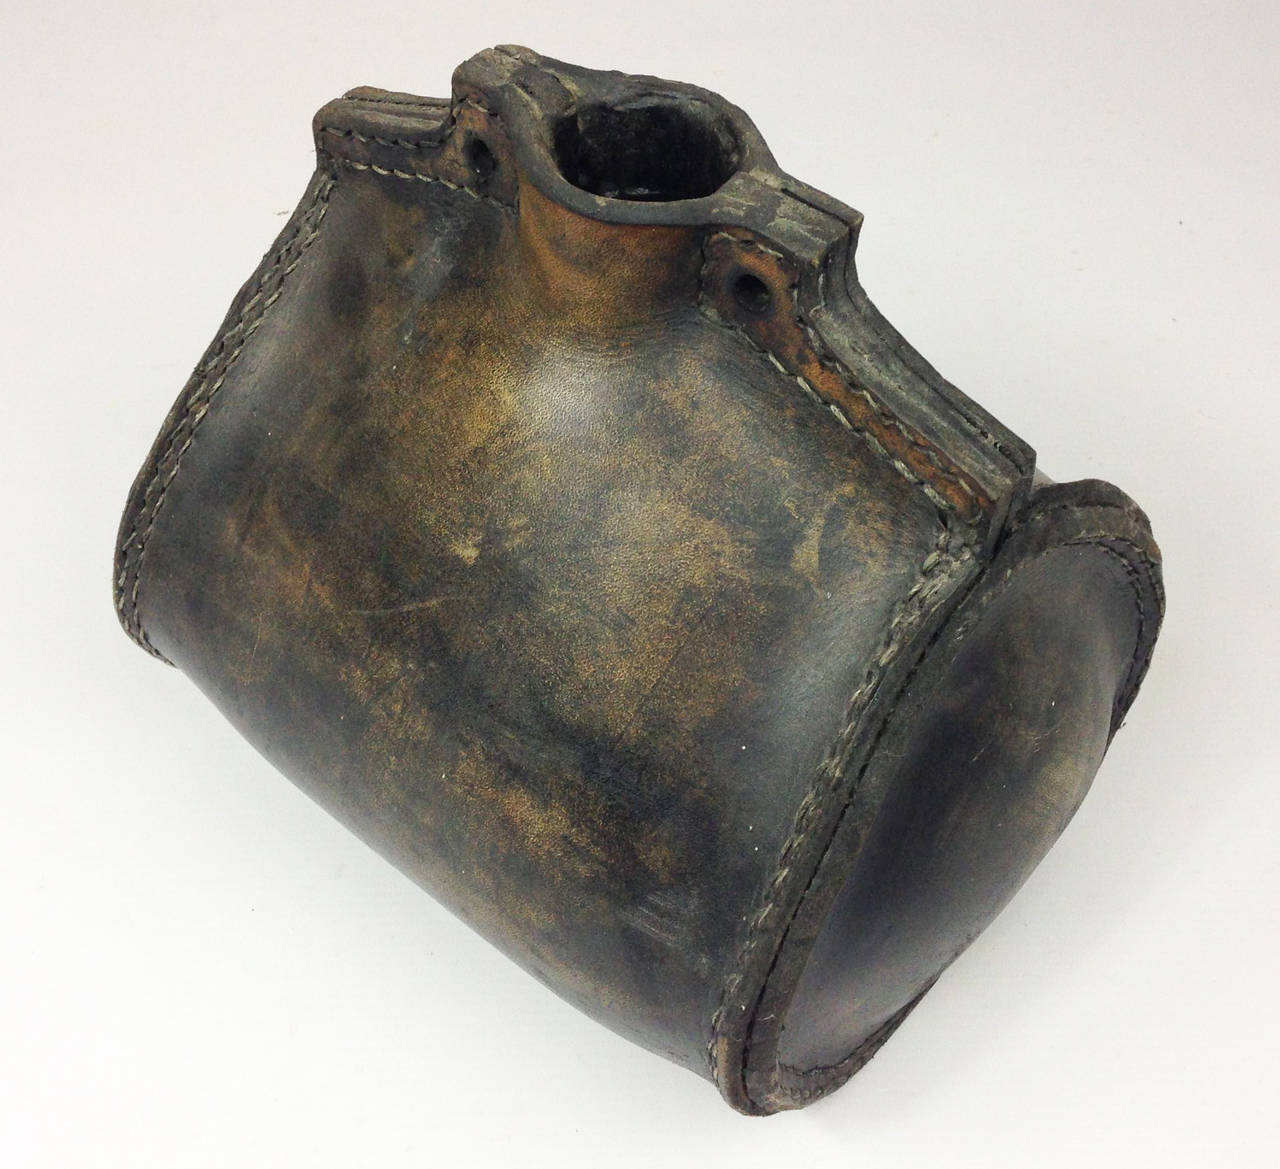 A 19th century English powder or water flask. Constructed of tarred leather with strong stitched seams. 

Ex-museum exhibit.